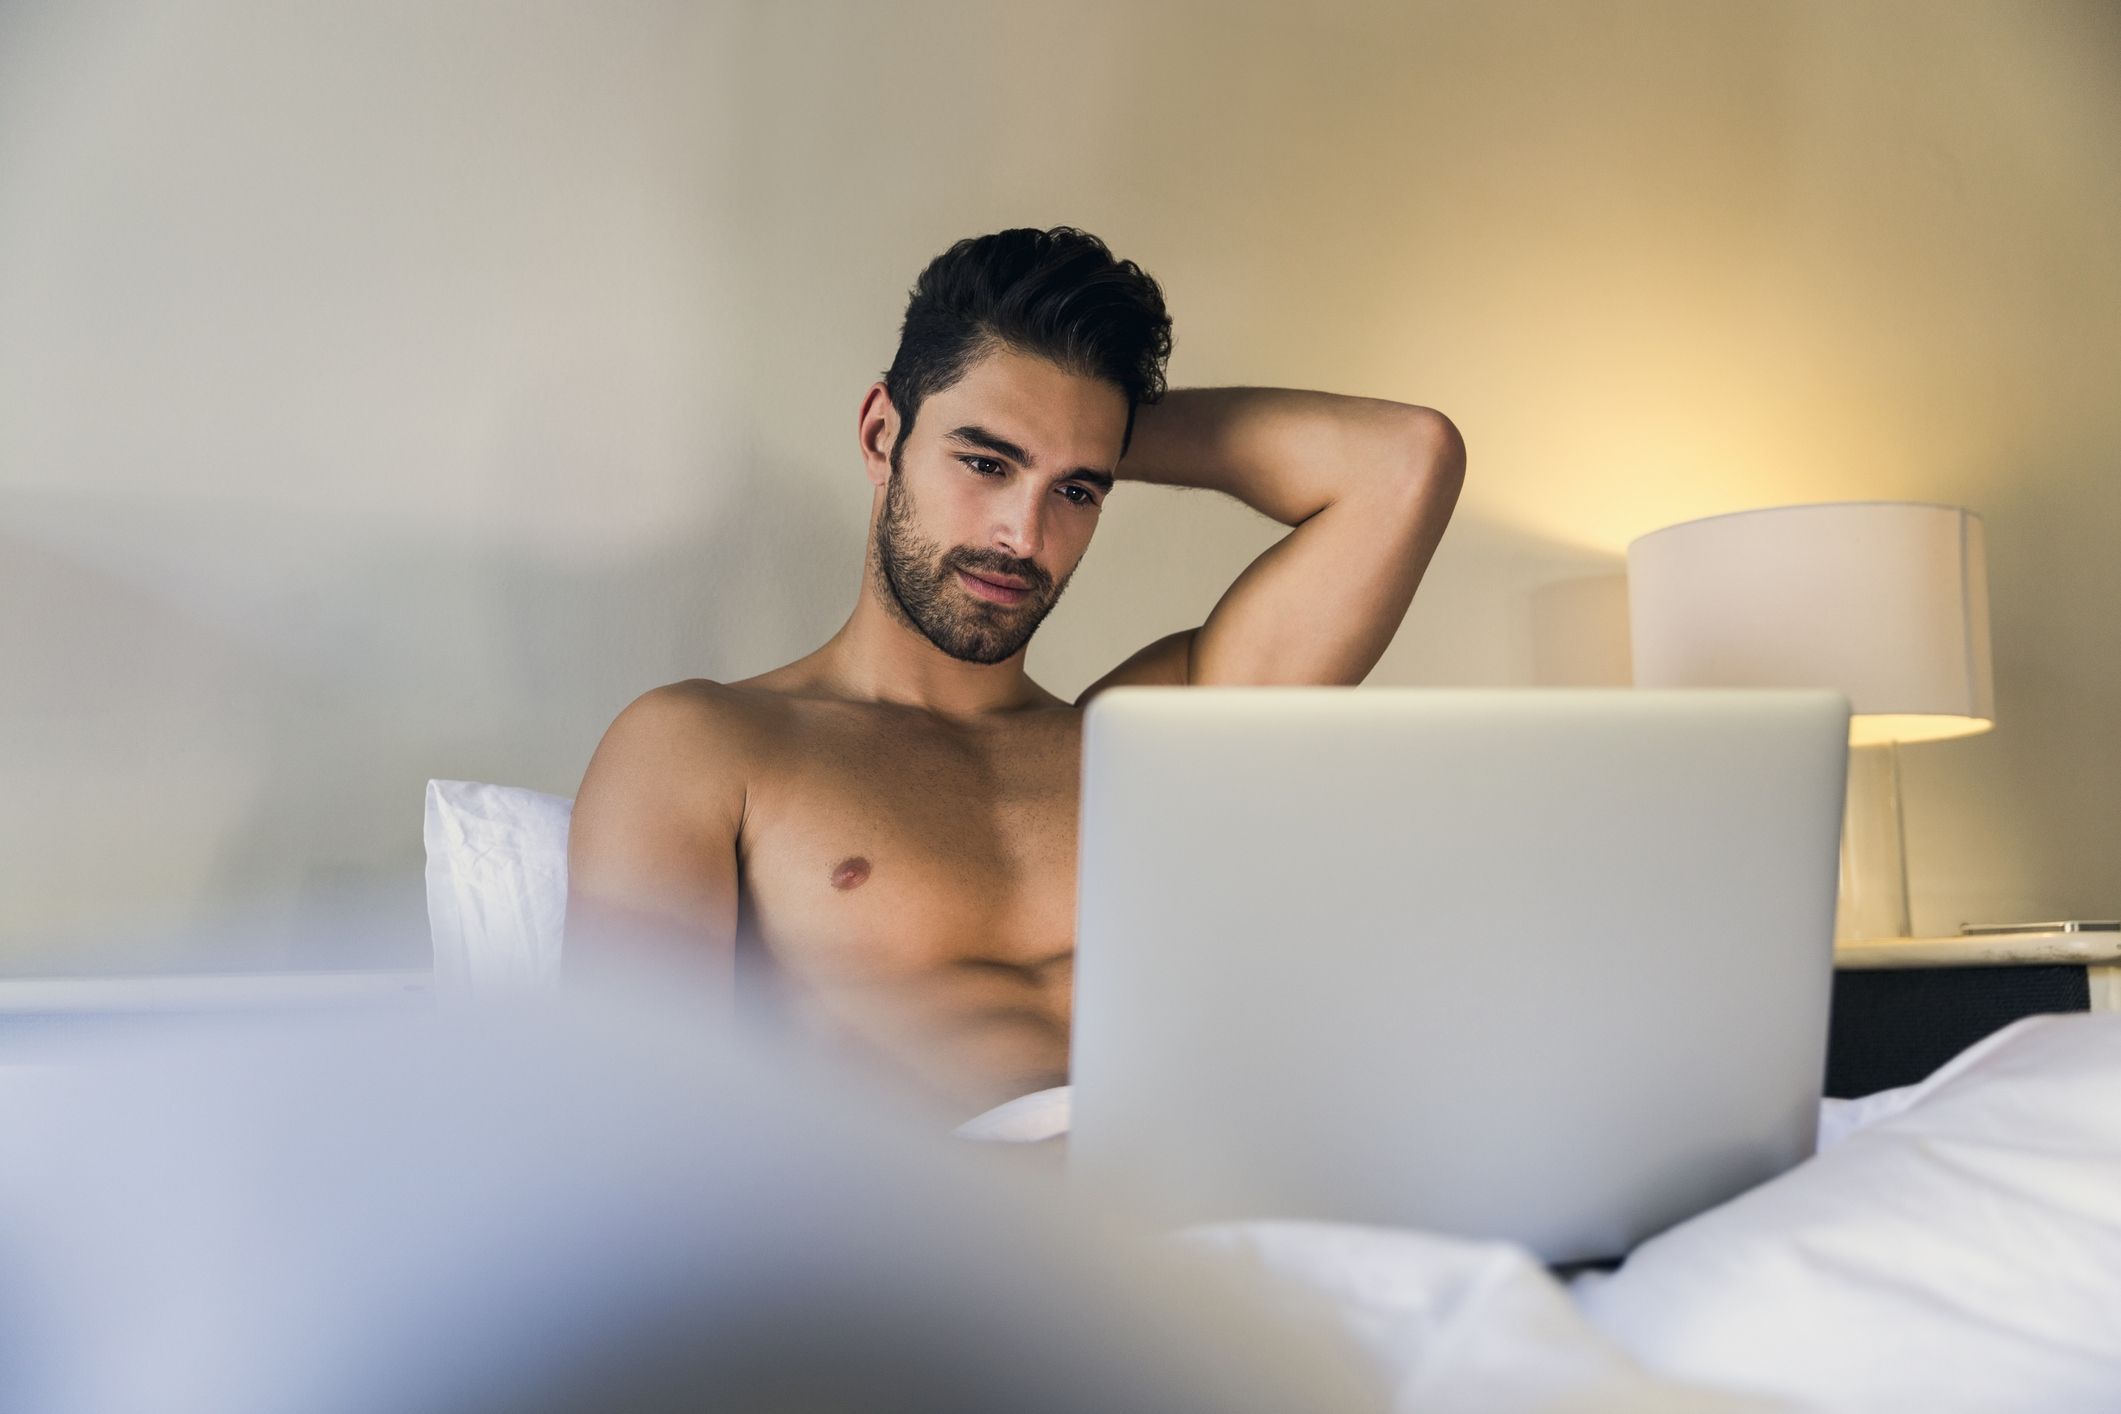 Dot Com Sexy Movies Open - How to Browse Porn Sites Safely Without Getting Hacked